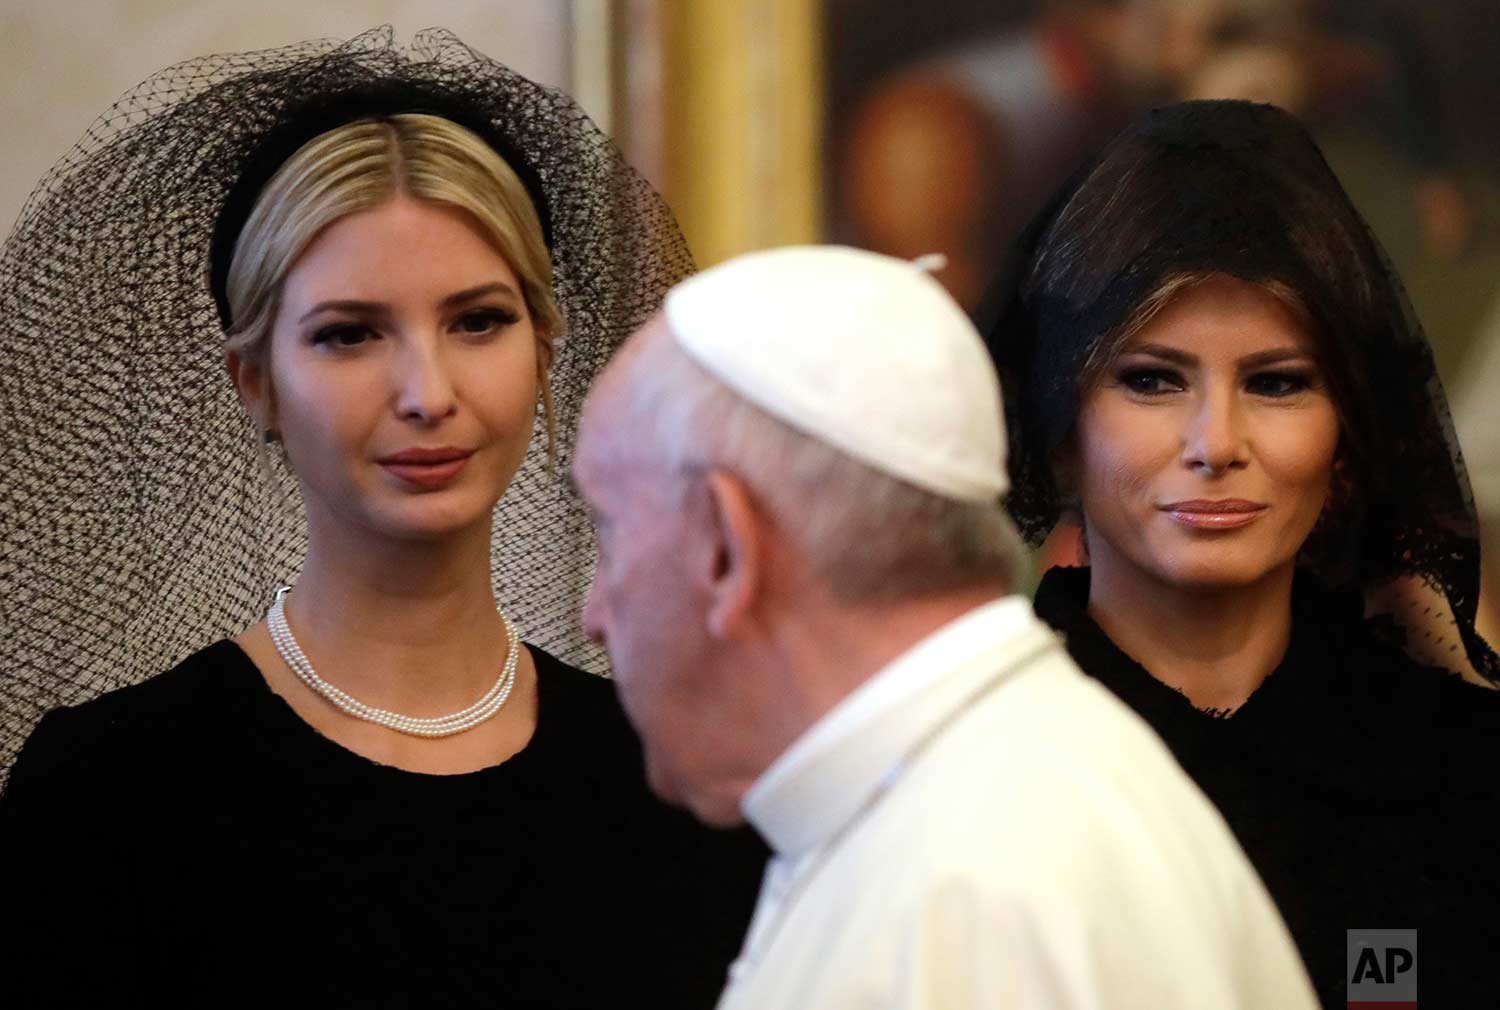  In this Wednesday, May 24, 2017 photo, Pope Francis walks past Ivanka Trump, left, and First Lady Melania Trump on the occasion of the private audience with President Donald Trump, at the Vatican. (AP Photo/Alessandra Tarantino) 